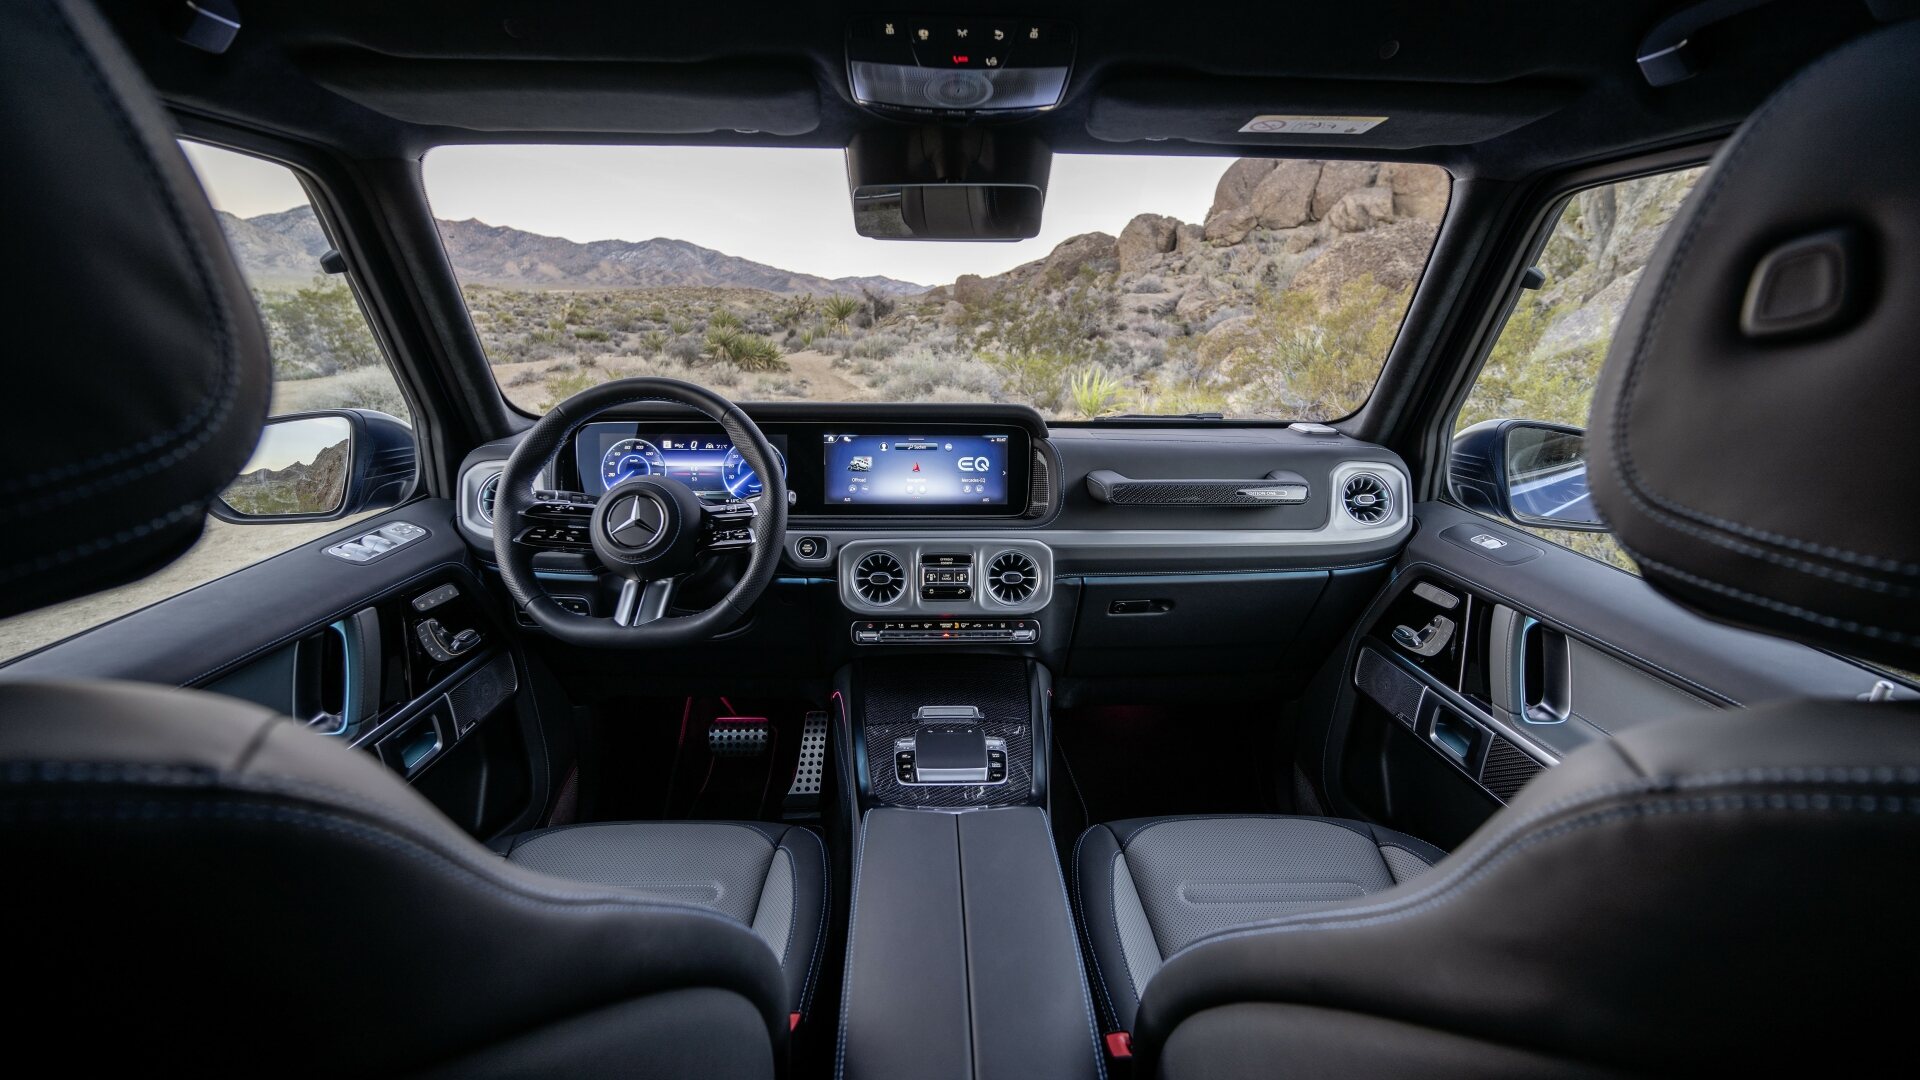 The Interior, Steering, Dashboard, And Central Console Of The All-New 2025 Mercedes Electric G-Wagen (Credits Mercedes-Benz Media)